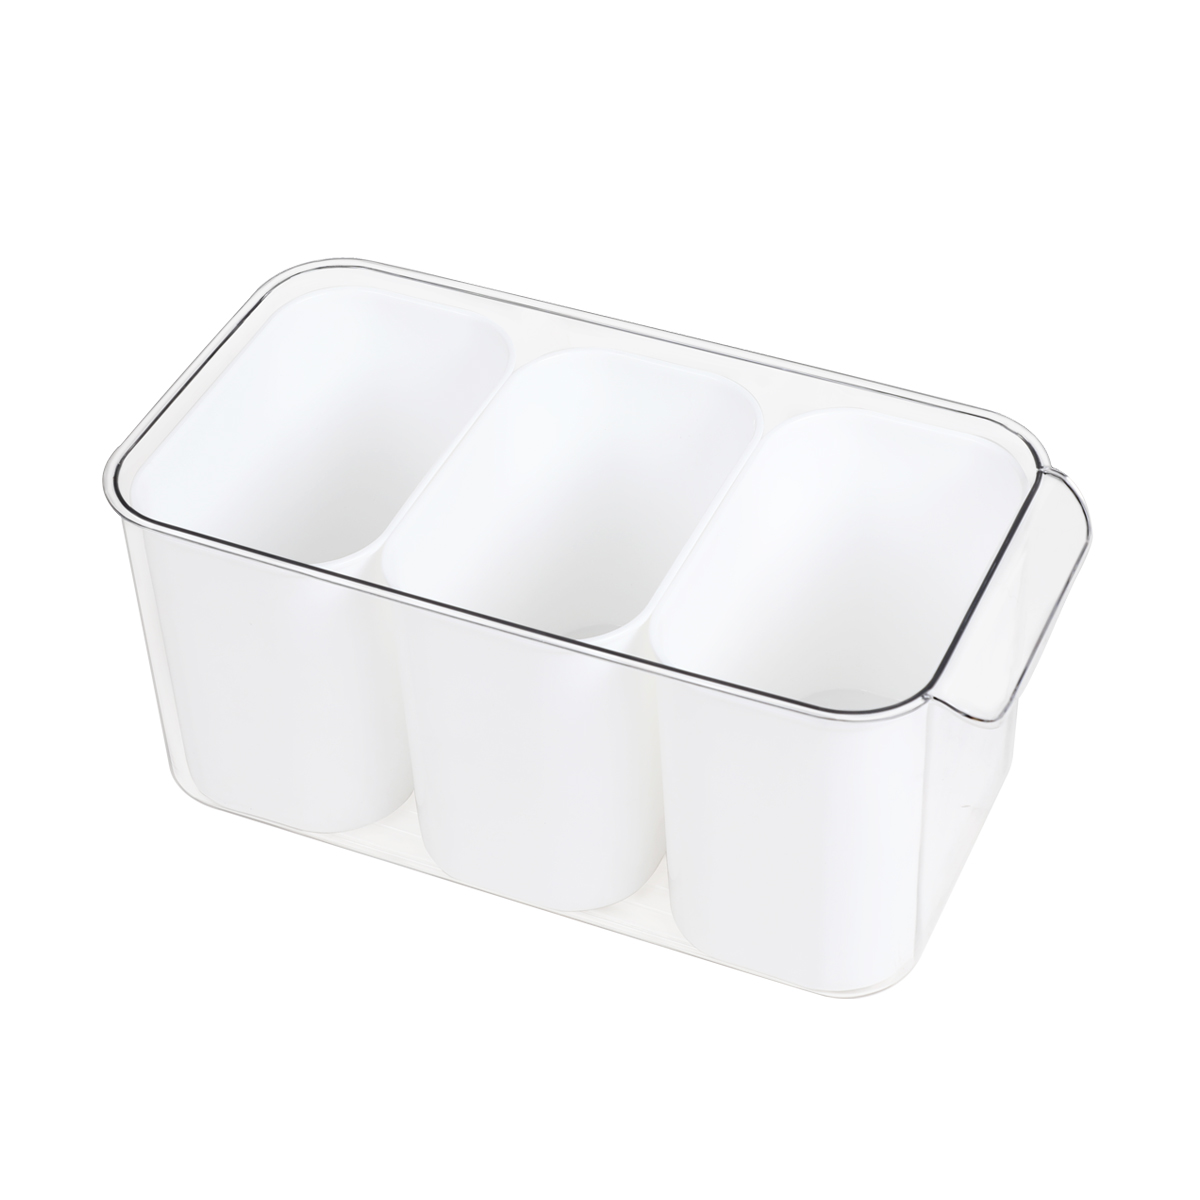 3 Compartments Storage Bins With Lids & Handles 